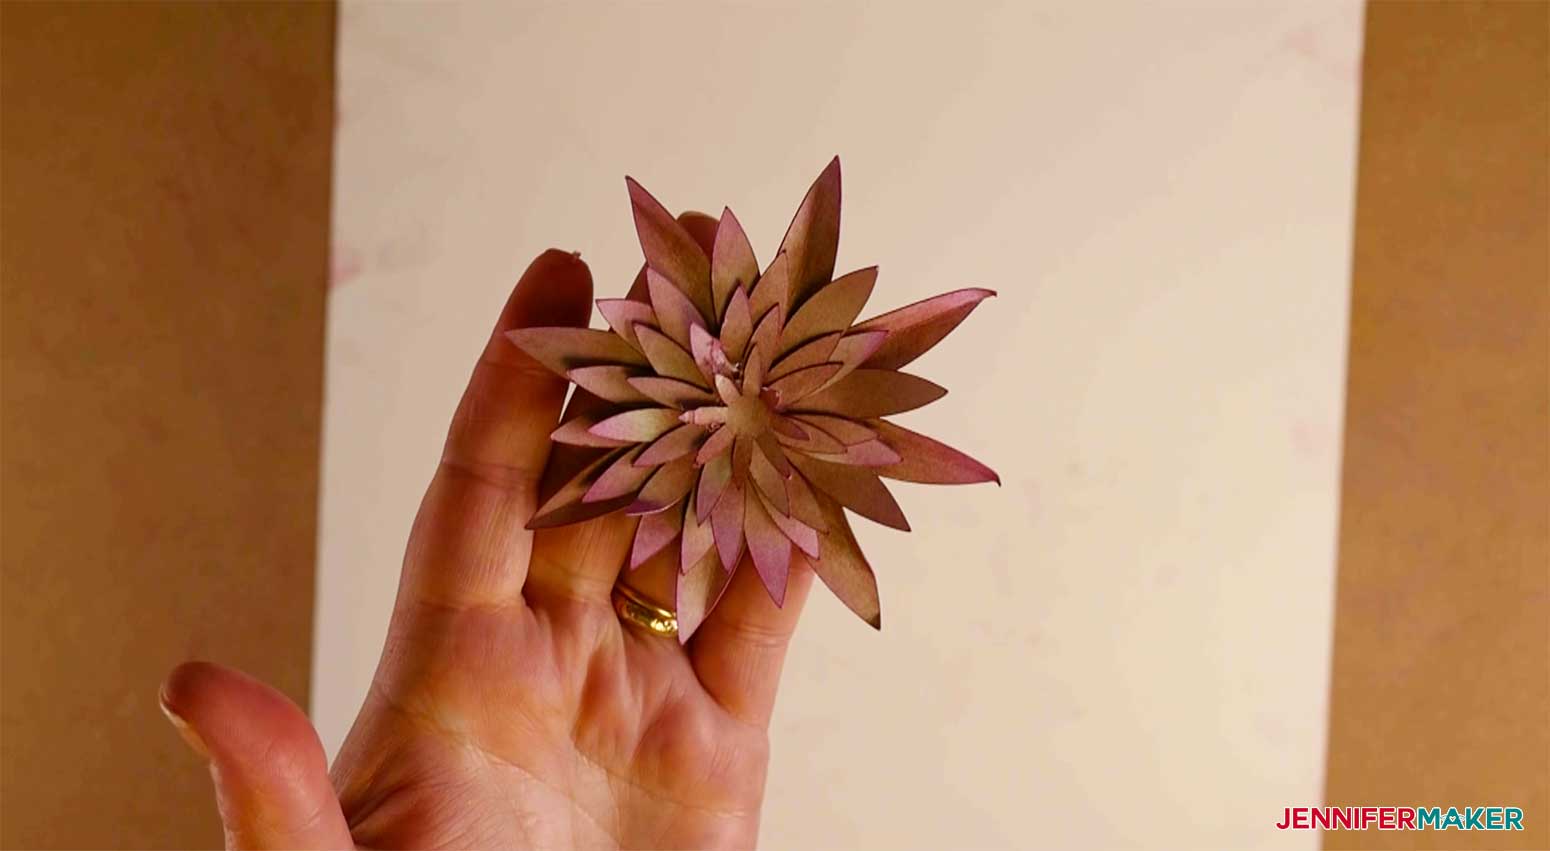 This is what my assembled succulent looks like for my paper succulents project